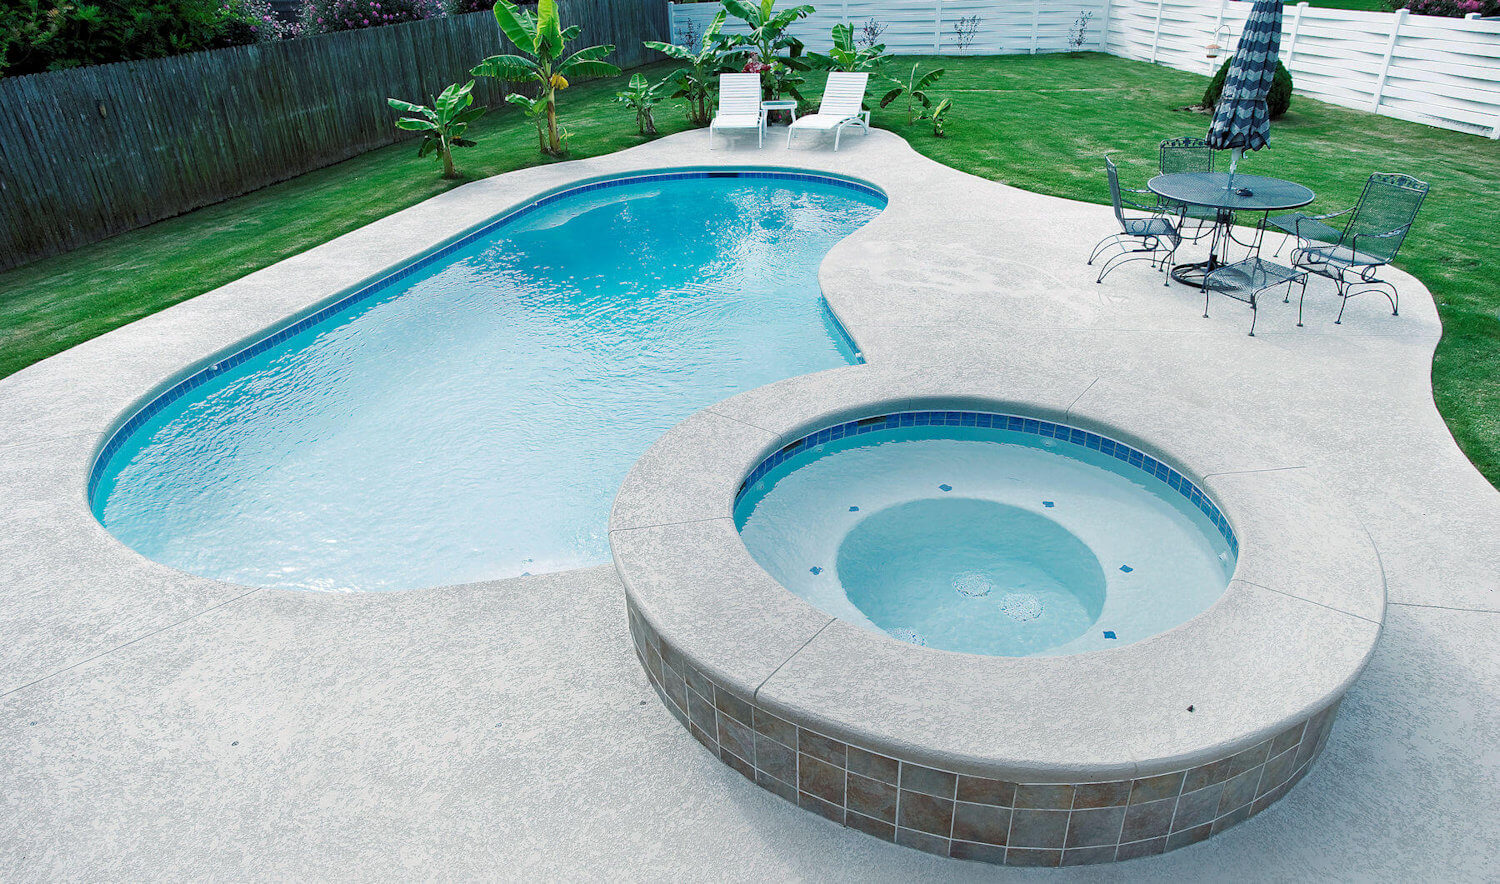 21 Effective Ways To Get More Out Of how do you get a hot tub in your backyard